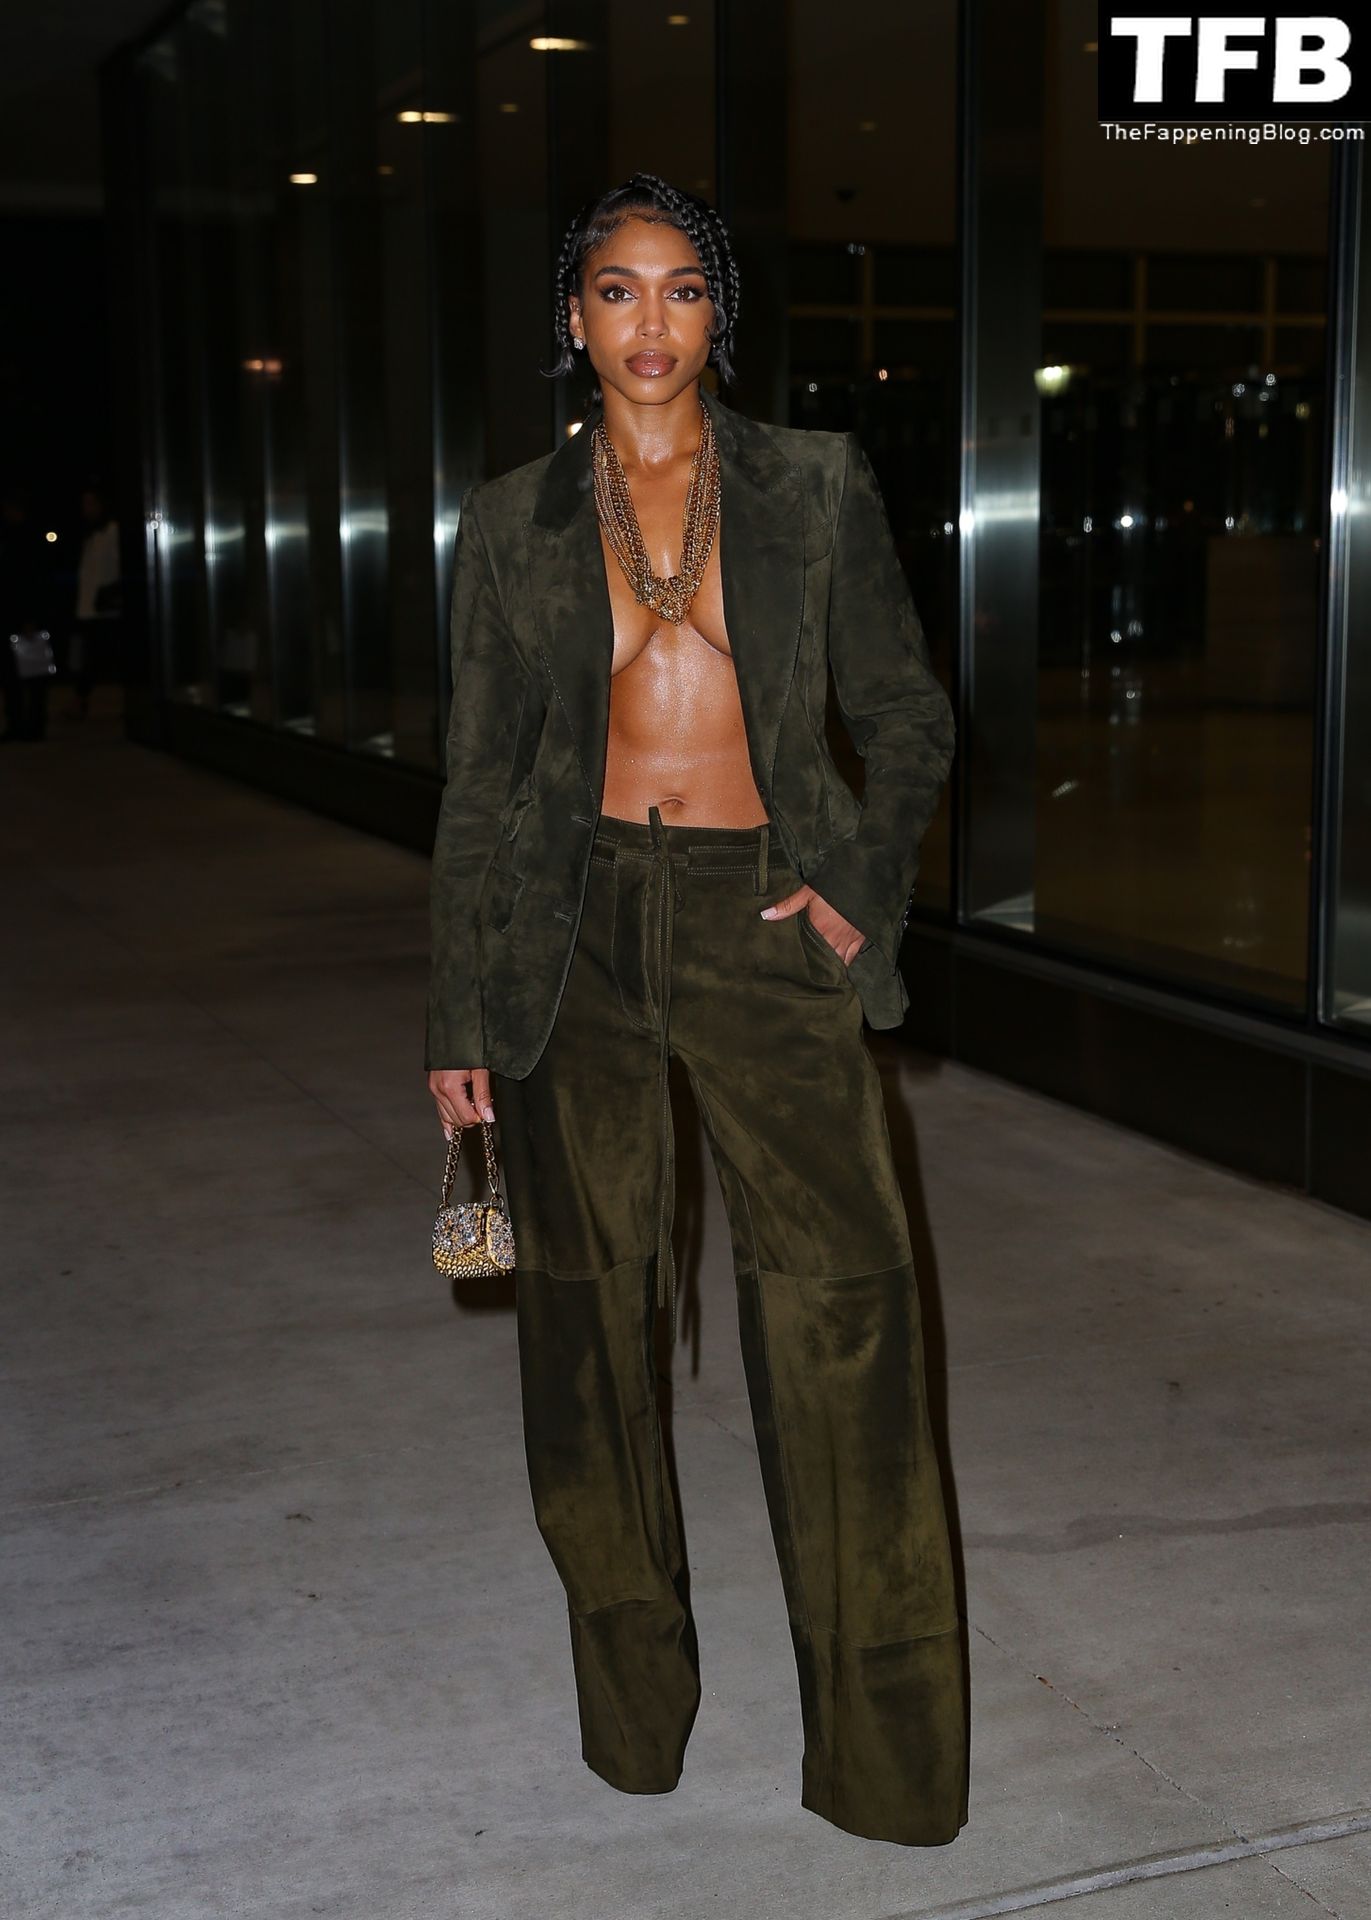 Lori Harvey Sexy The Fappening Blog 13 - Lori Harvey Shows Off Her Tits at the Tom Ford Fashion Show (38 Photos)